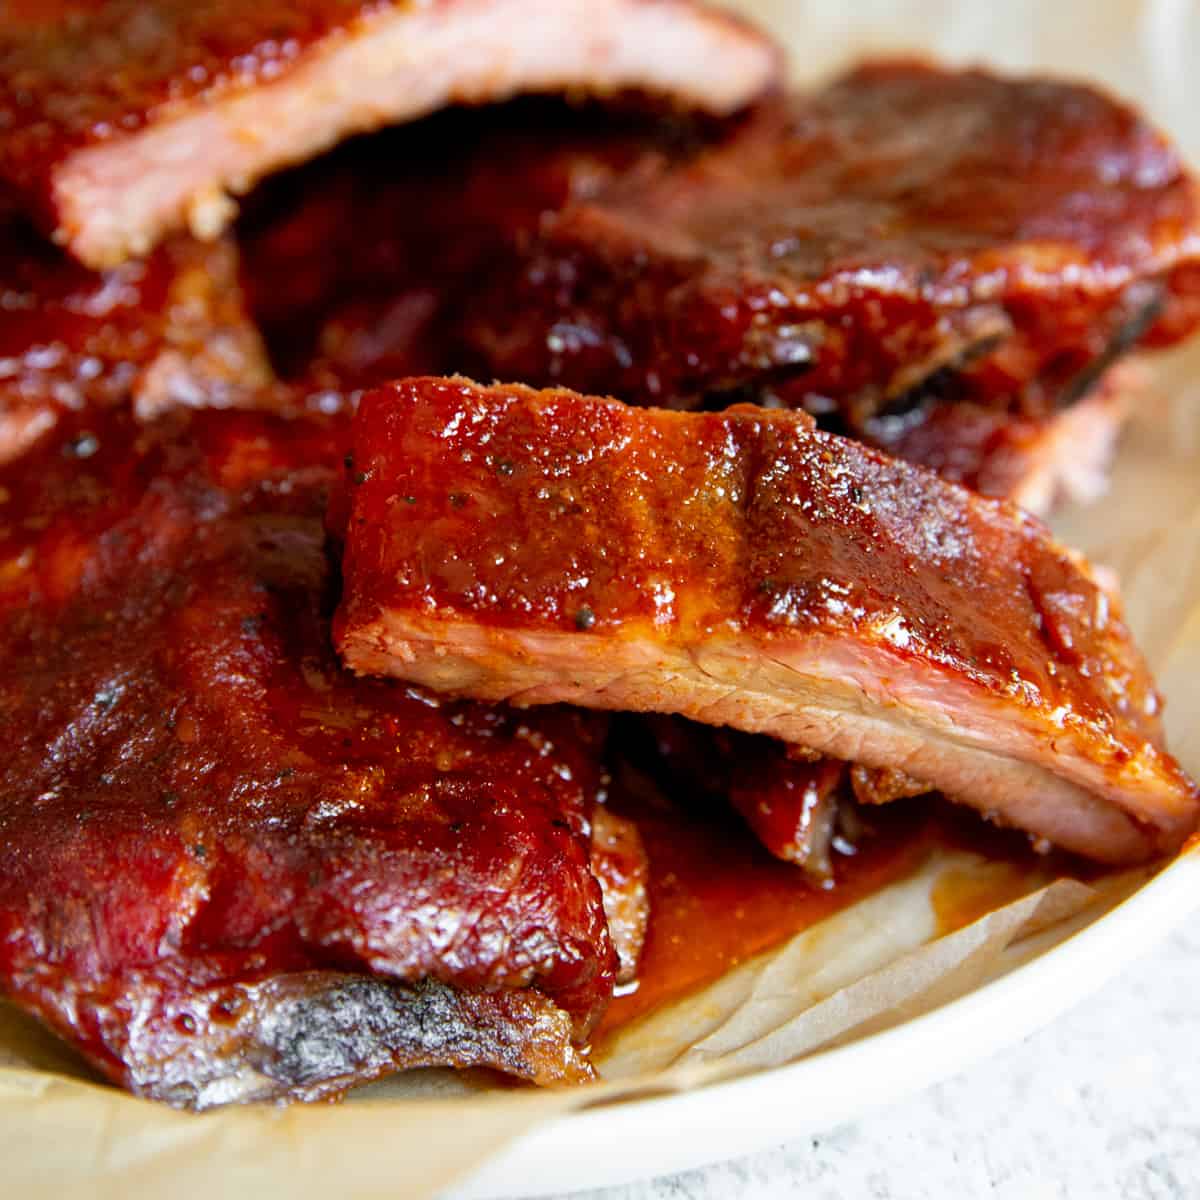 https://fromscratchfast.com/wp-content/uploads/2020/06/Smoked-Baby-Back-Ribs-Recipe.jpg